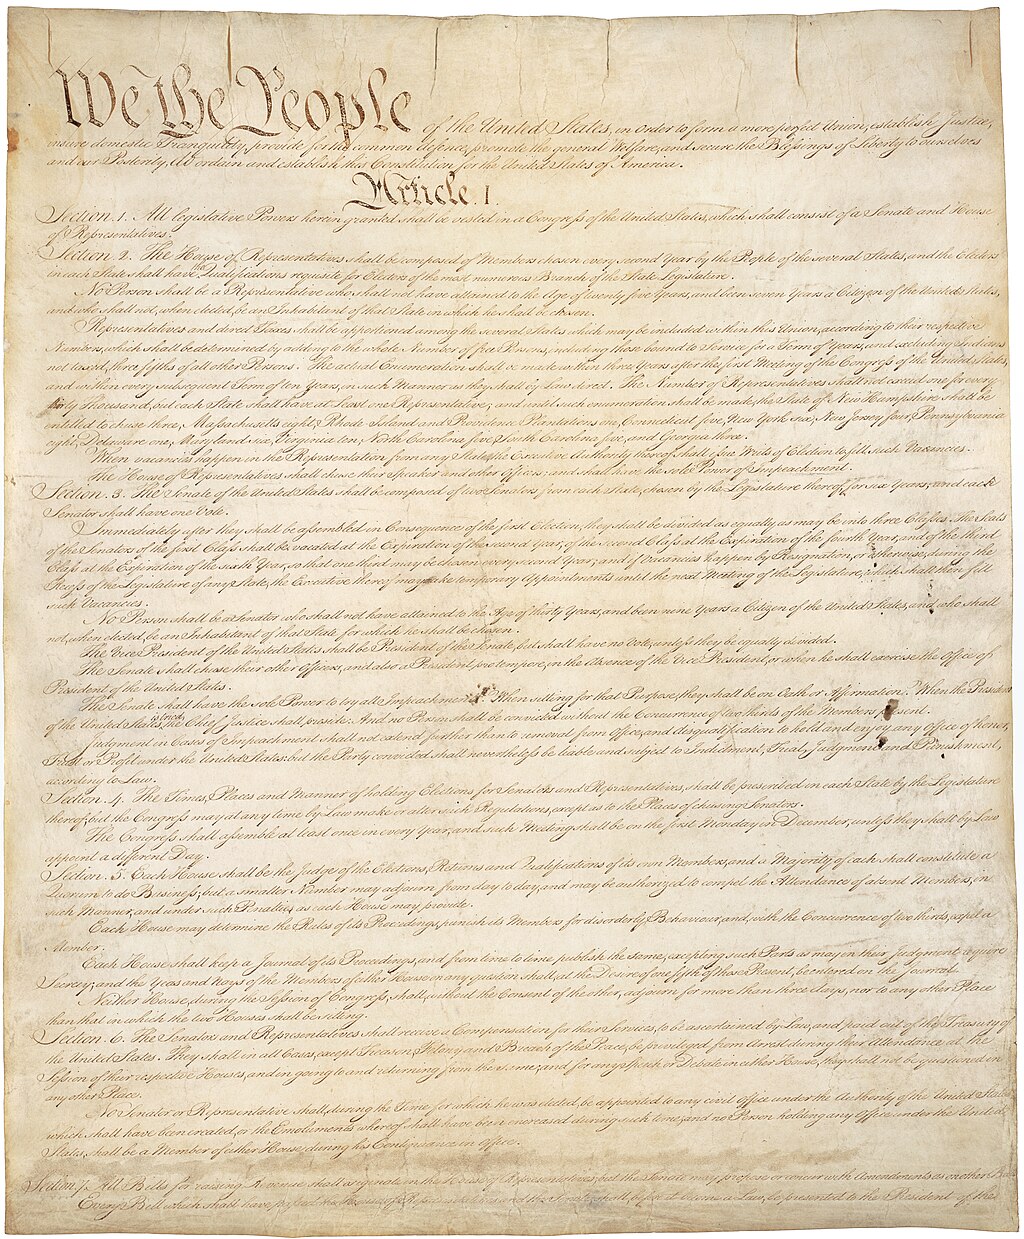 Constitution of the United States, page 1